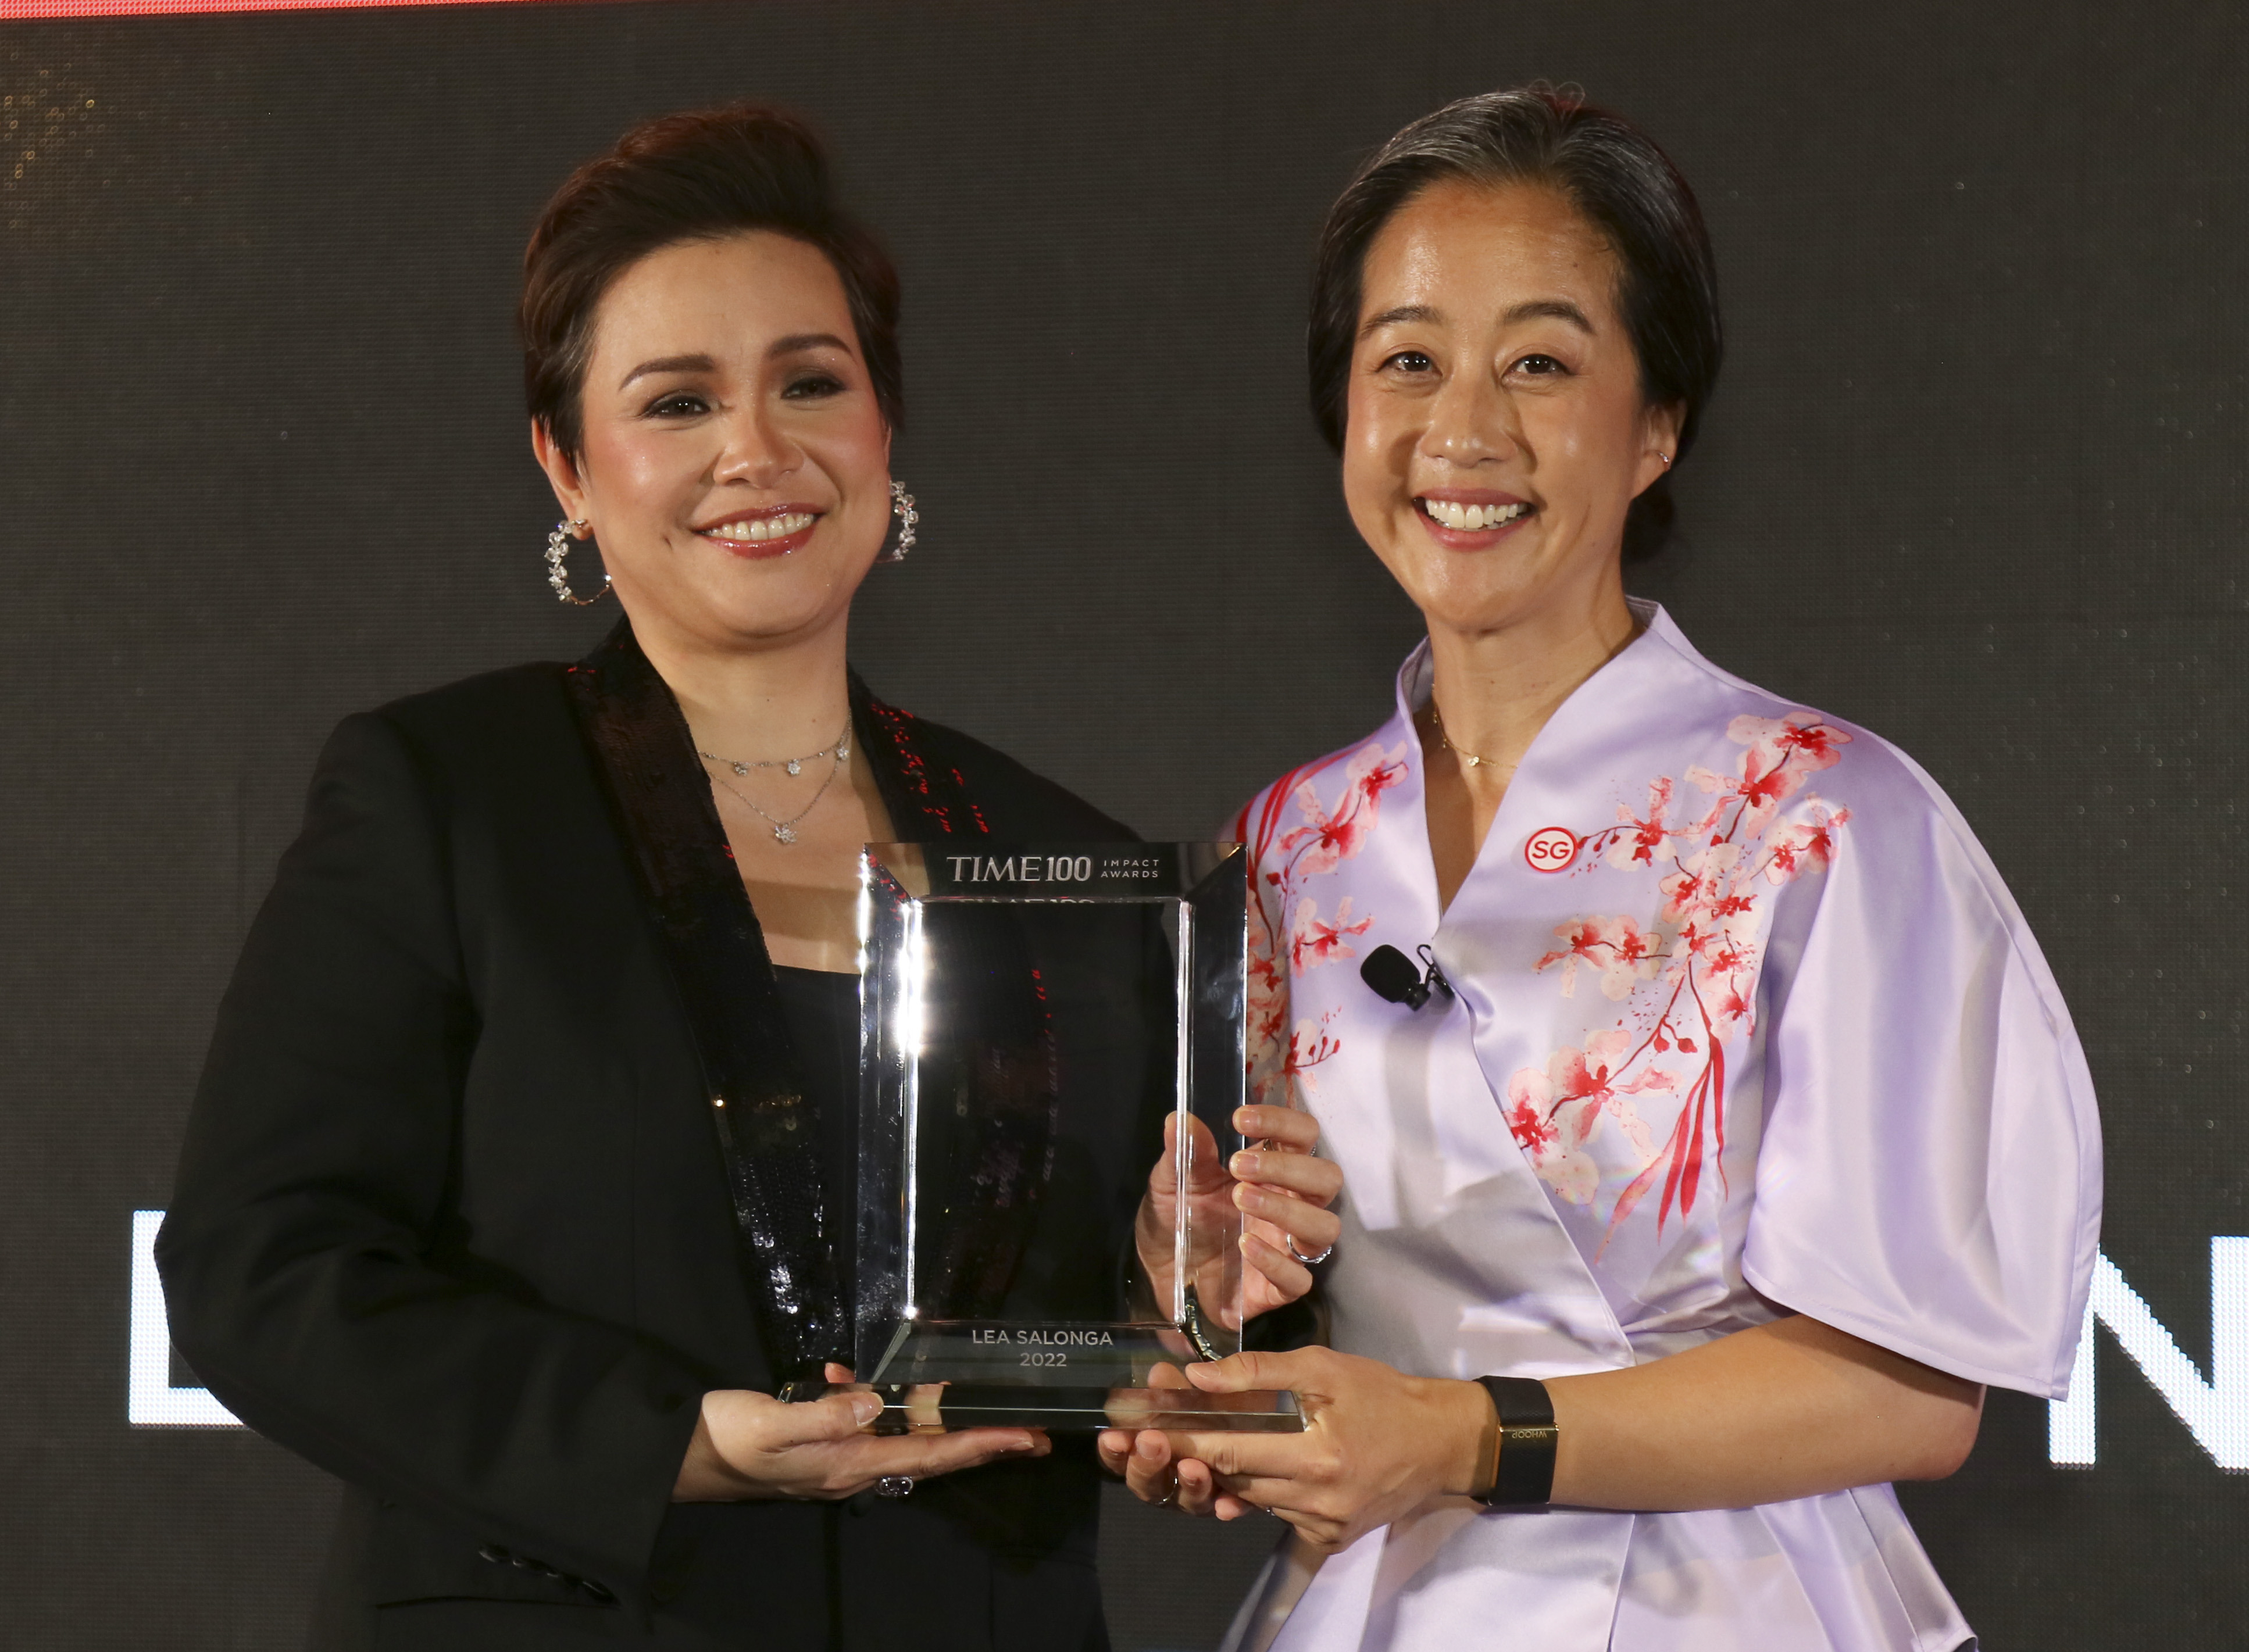 TIME Chief People Officer Sue Suh, right, presents singer and actor Lea Salonga, left, with a TIME100 Impact Award on Oct. 02, 2022 in Singapore. (Ore Huiying—Getty Images for TIME)